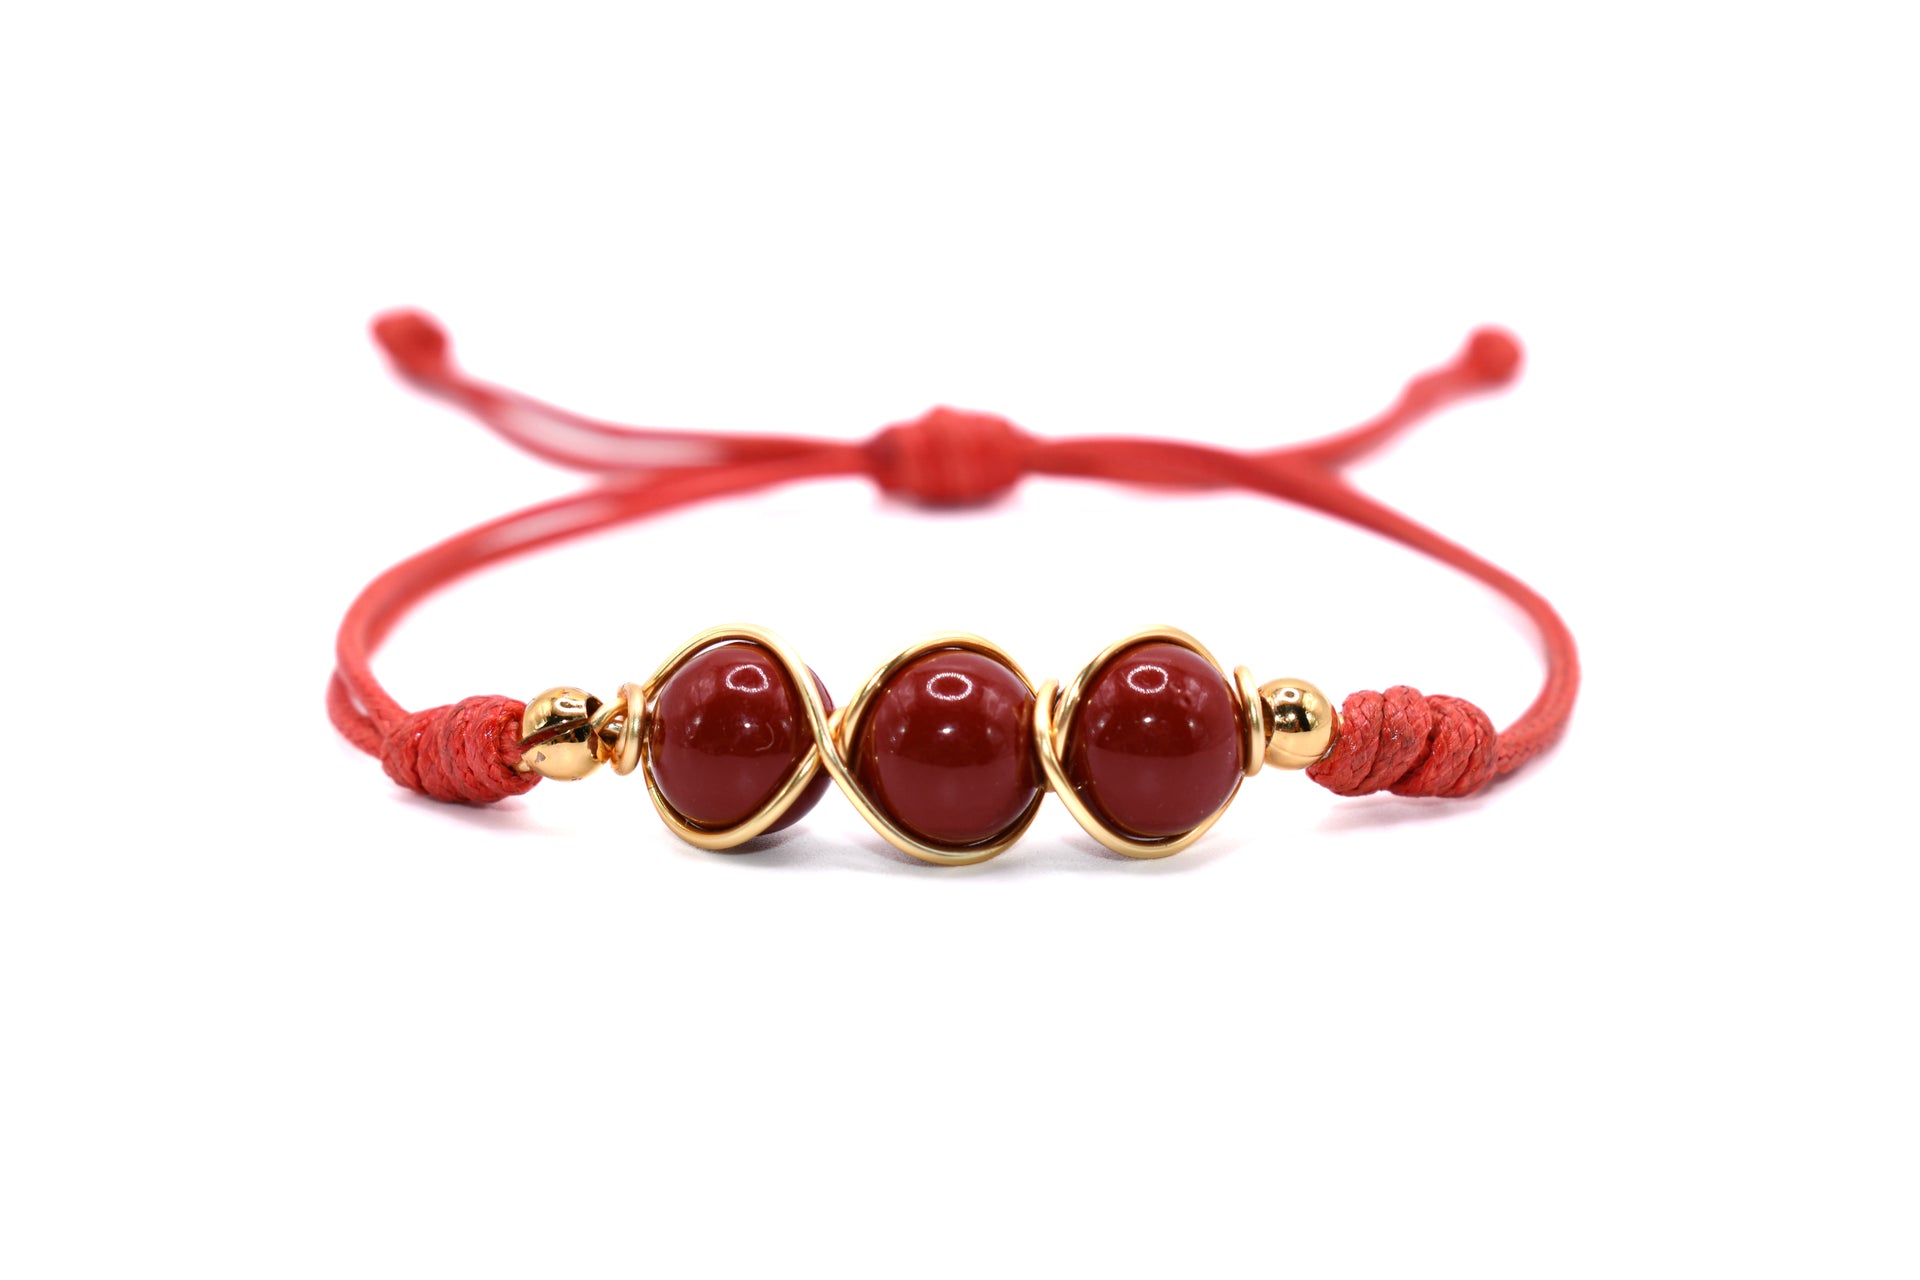 Trio Carnelian Natural Stone Adorned with Gold Plated Accents on a Red  String Handmade Bracelet | Adjustable and Healing